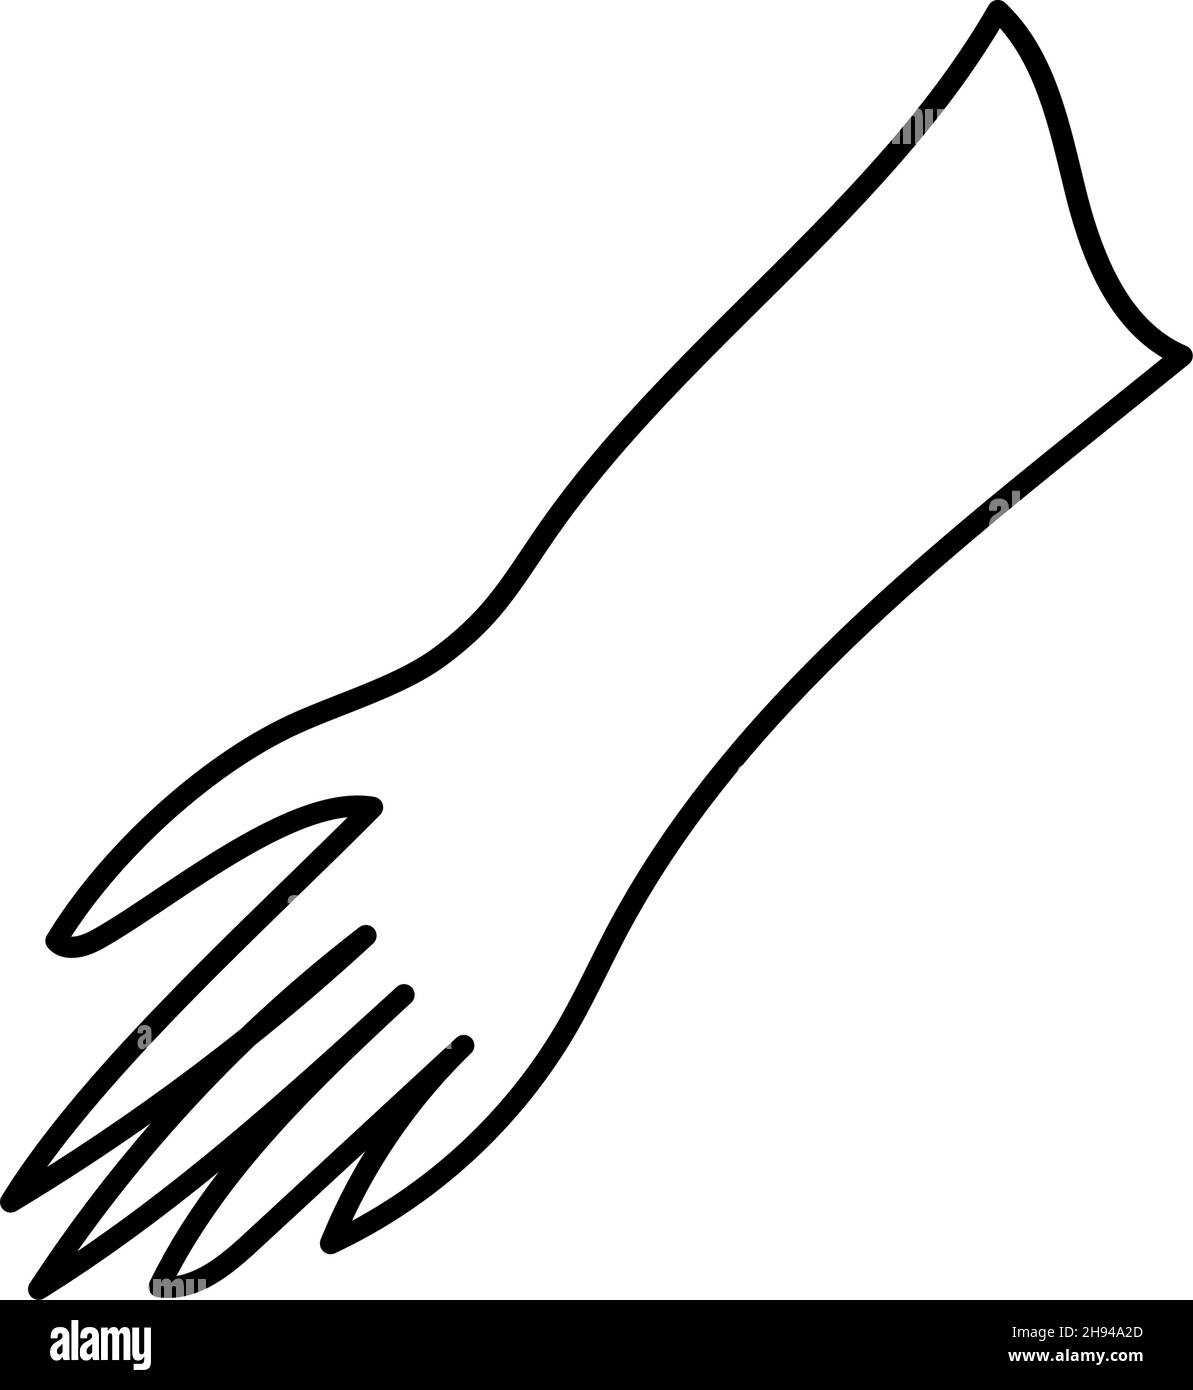 Gloves thin line icon. doodle style hand drawn. Garden glove vector illustration isolated on white. Stock Vector